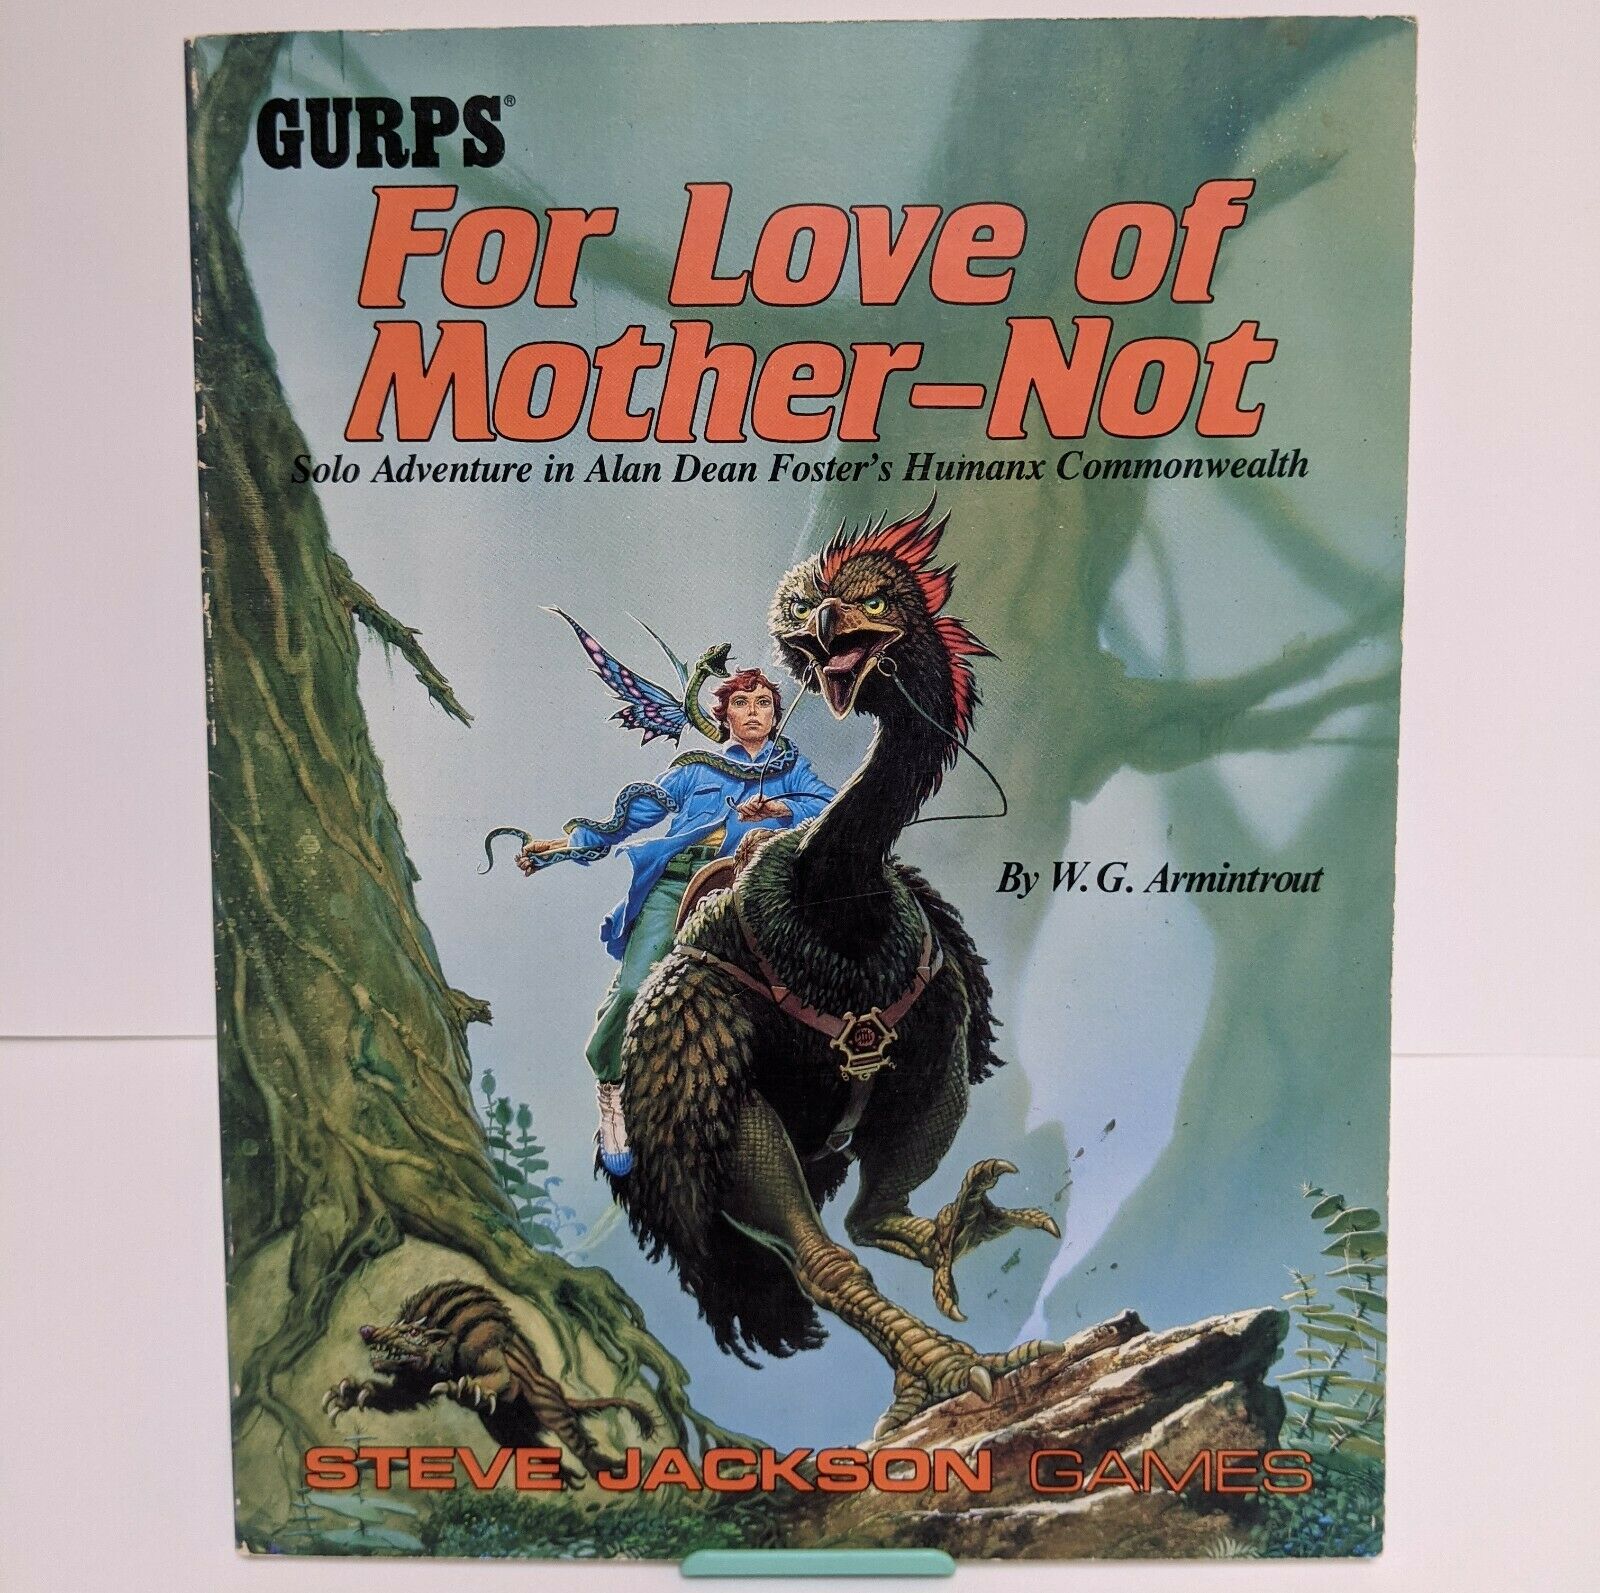 Gurps For Love Of Mother-not W.g. Armintrout Steve Jackson Games Solo Adventure